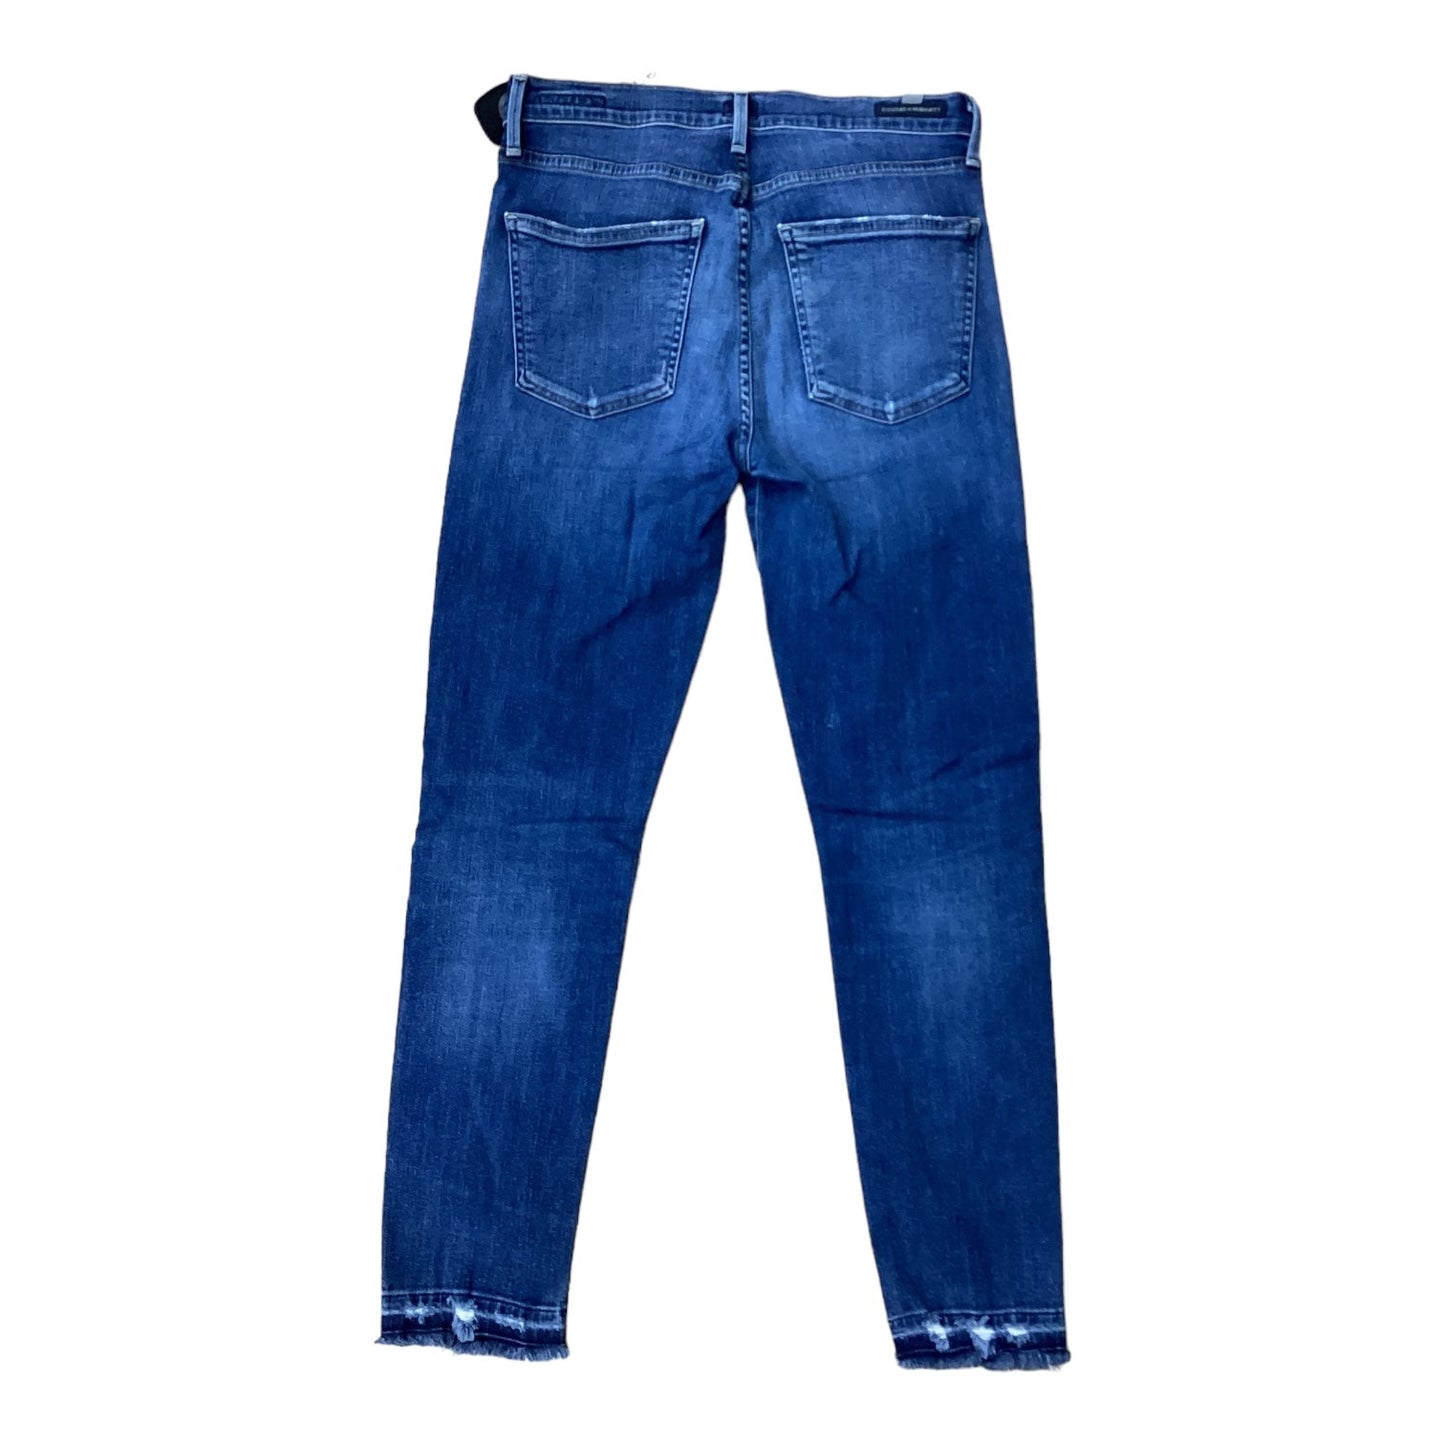 Blue Jeans Designer Citizens Of Humanity, Size 6